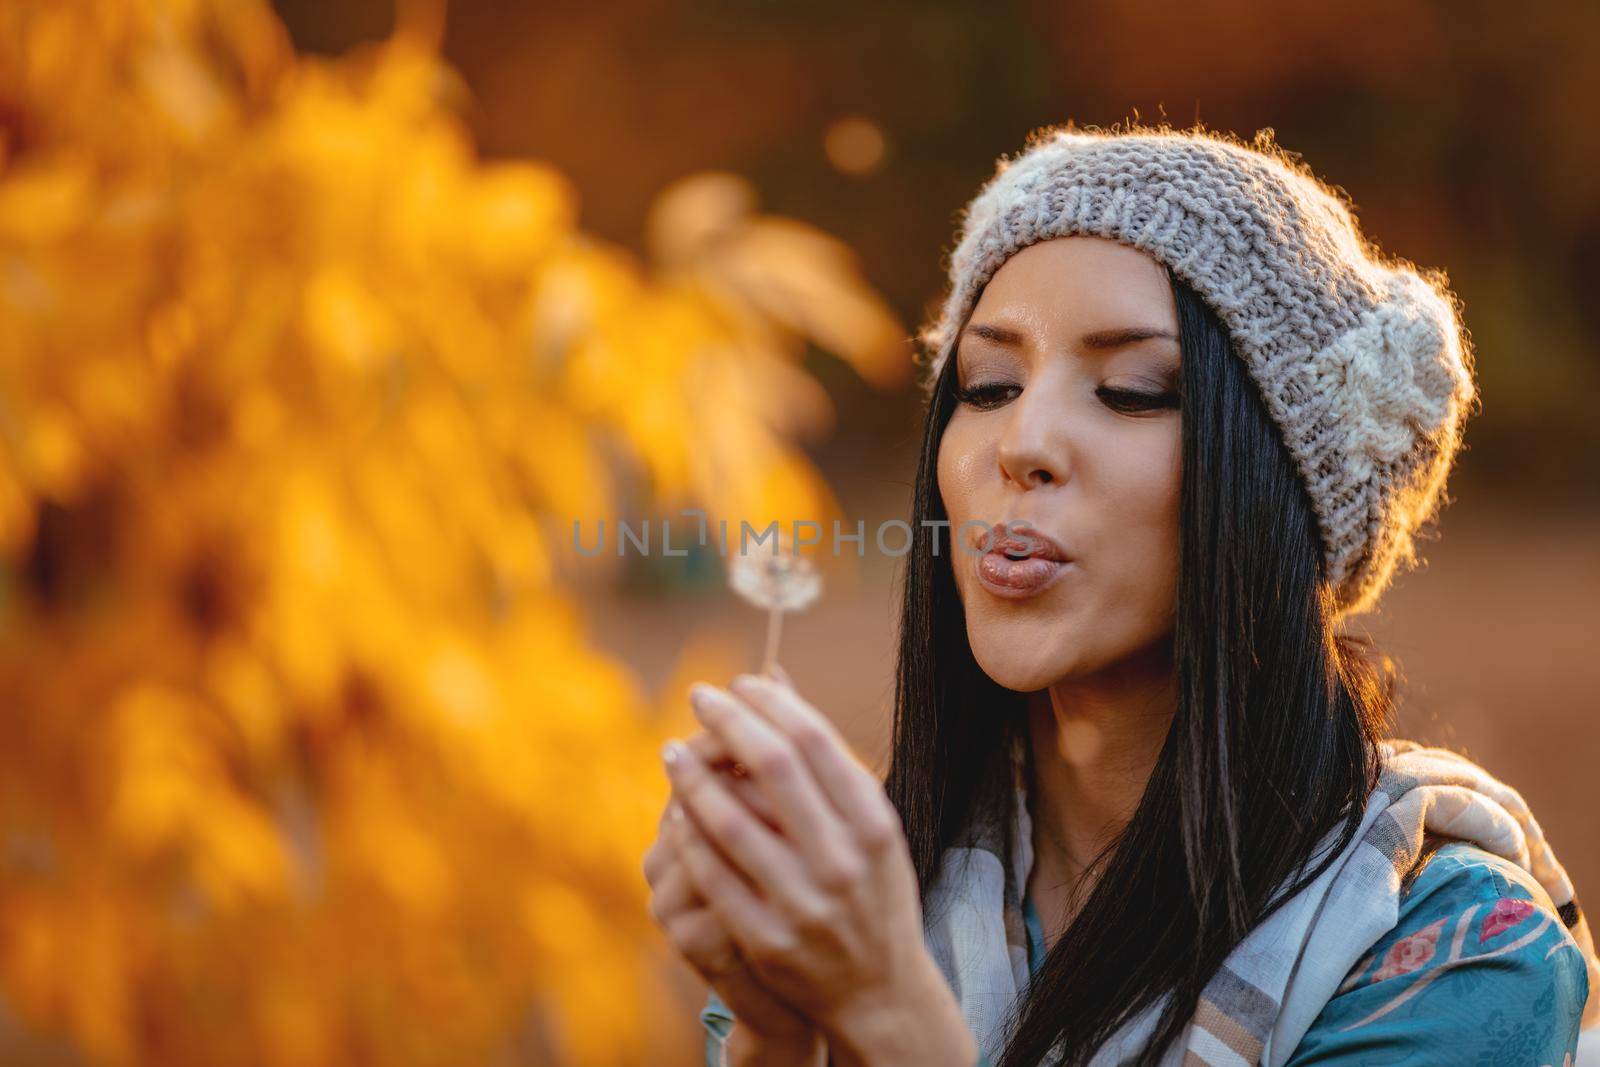 Portrait of young positive beautiful smiling young woman blowing dandelion in autumn park.